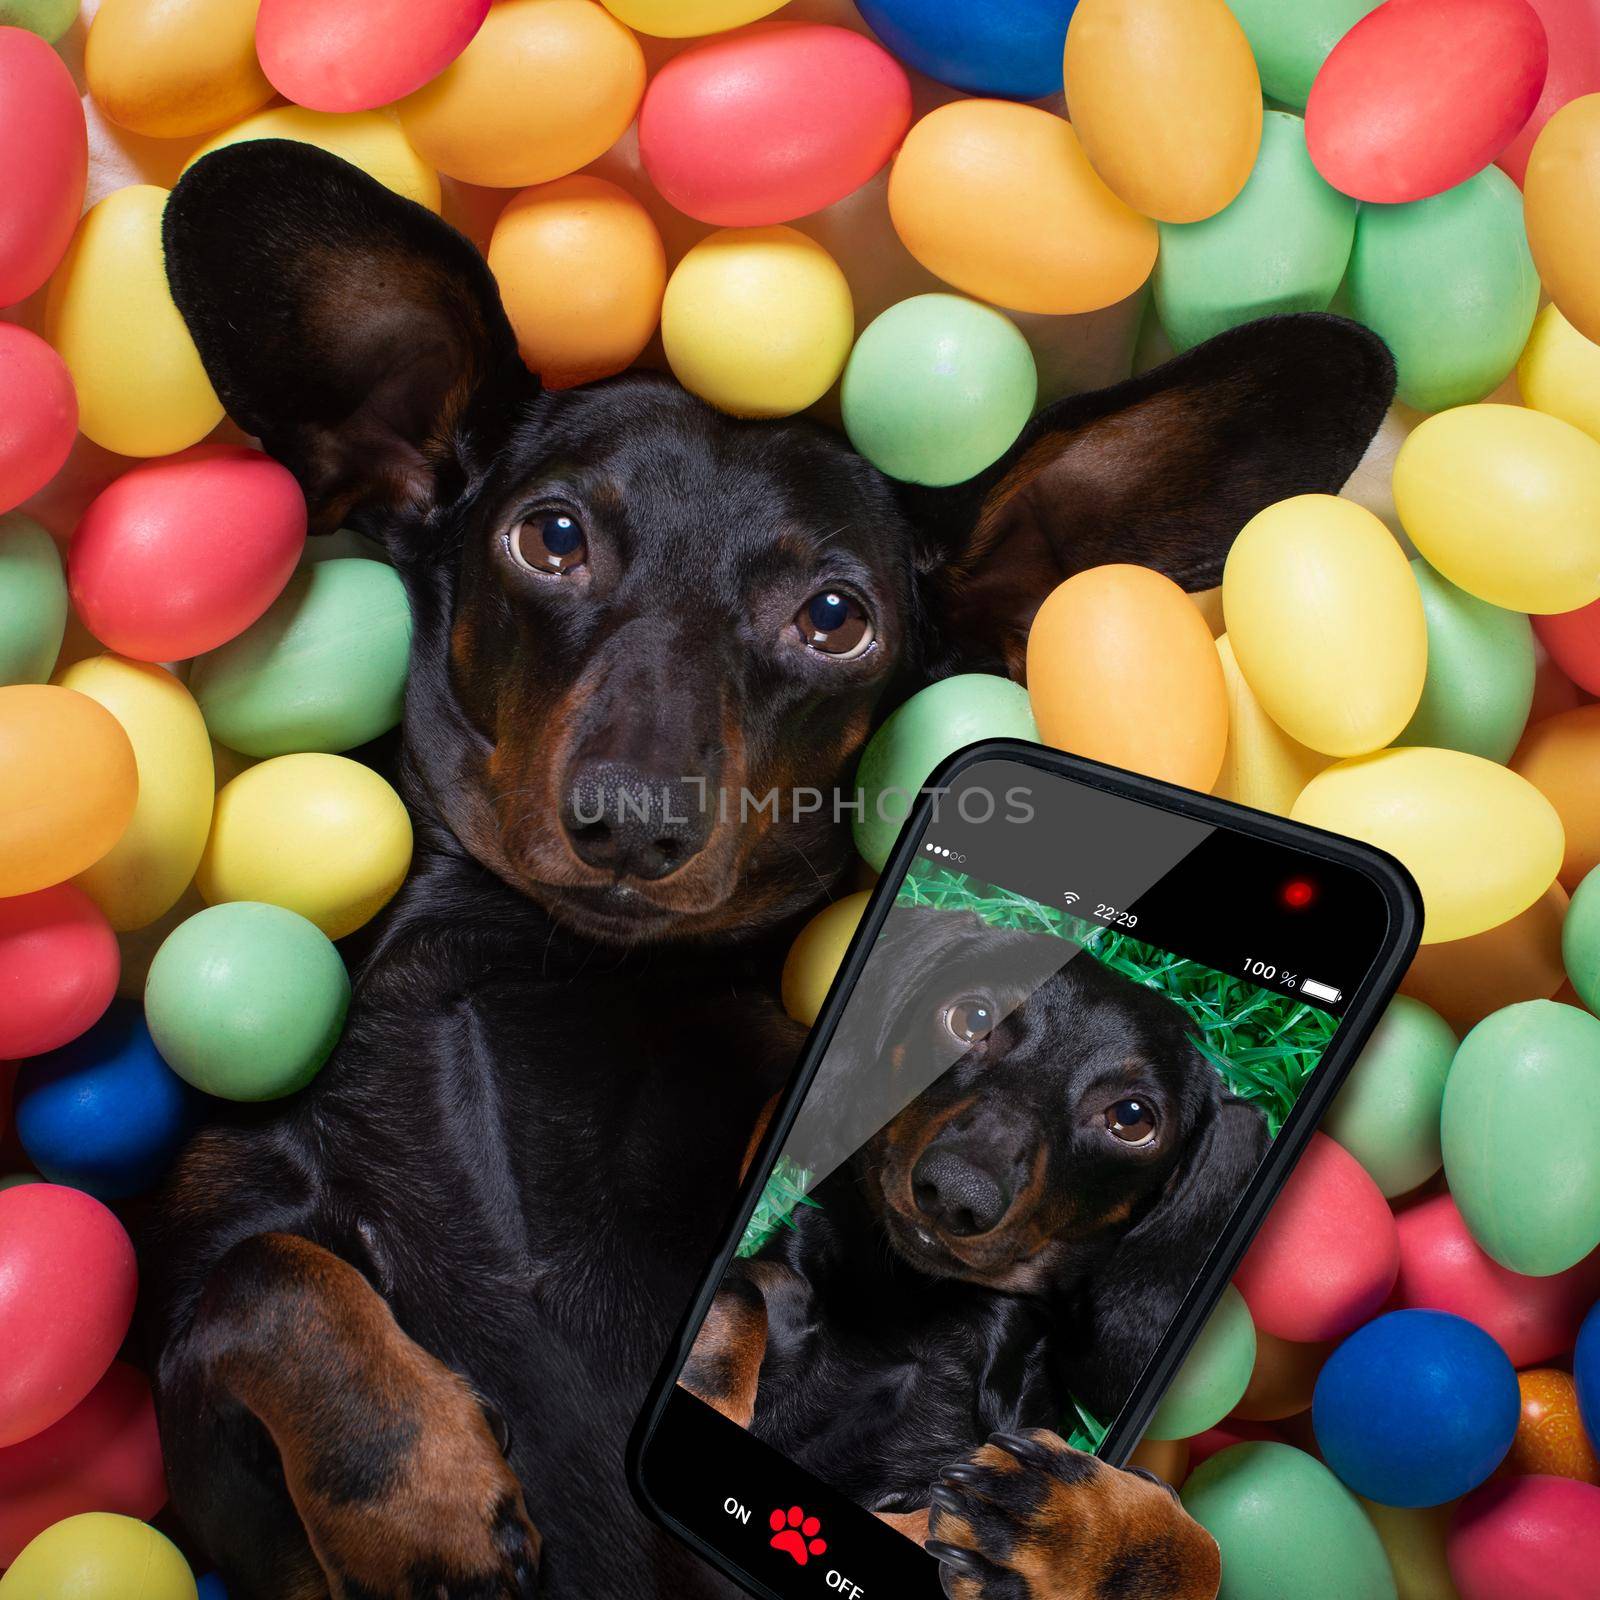 happy easter  dachshund sausage  dog lying in bed full of funny colourful eggs ,  for the holiday season, taking a selfie with smartphone